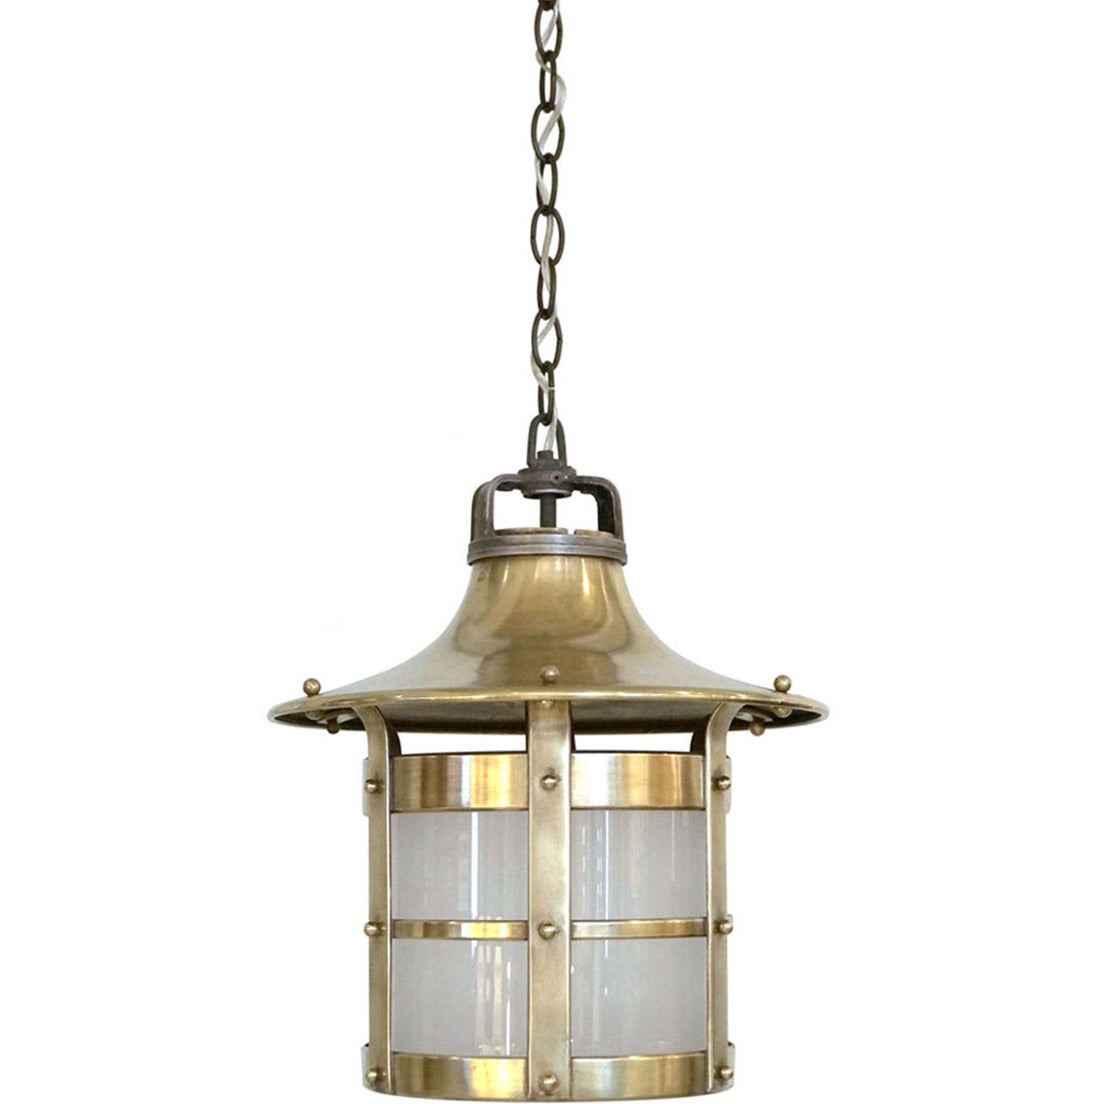 Circular Brass Lantern with Frosted Glass Shade, France, circa 1950